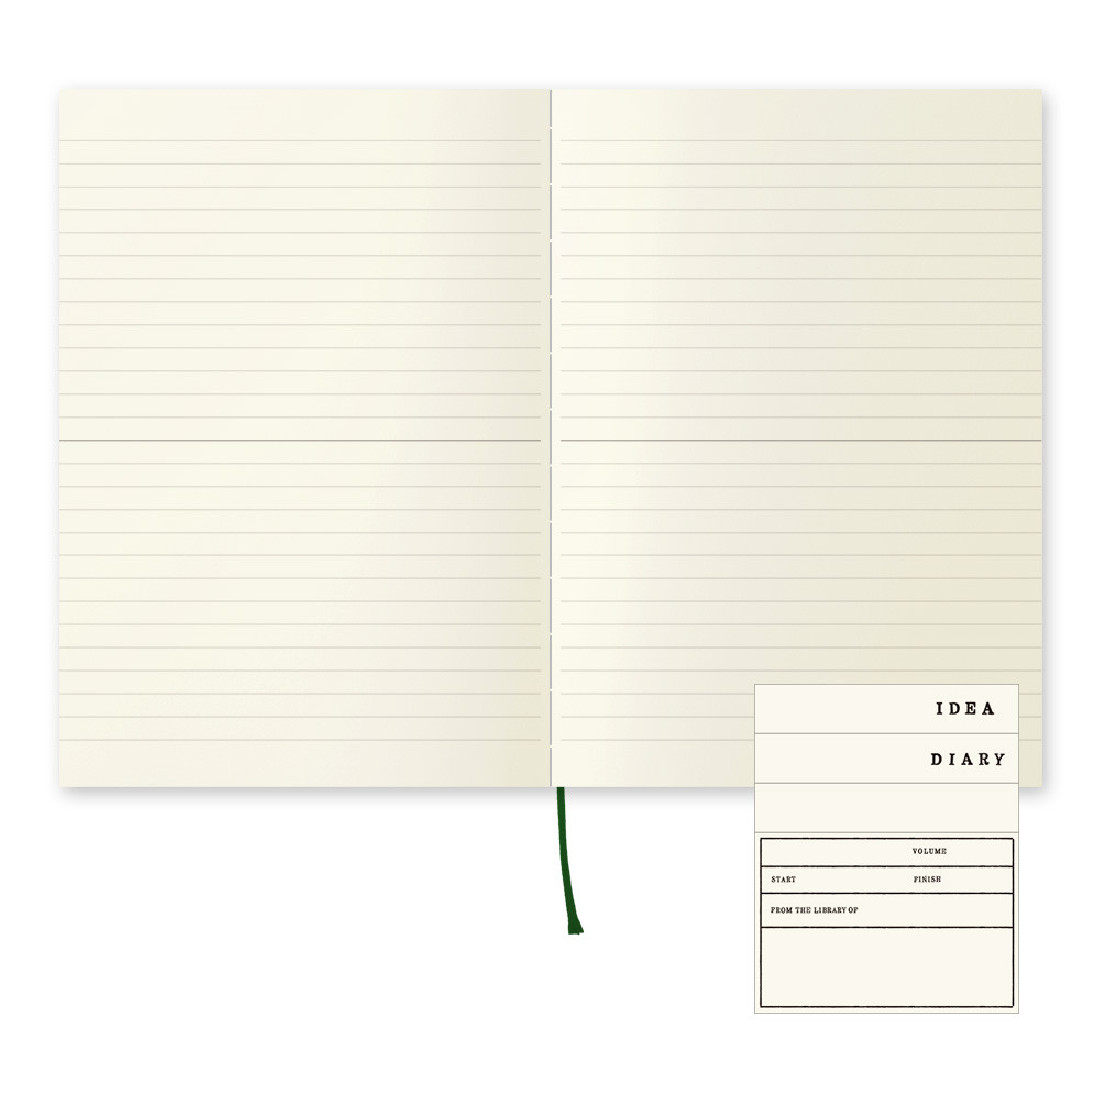 Midori MD Notebook A5148x210 mm, 176 pages, glassine paper cover, Lined, Bookmark string, Label stickers, Thread-stitched book-binding (15294006)